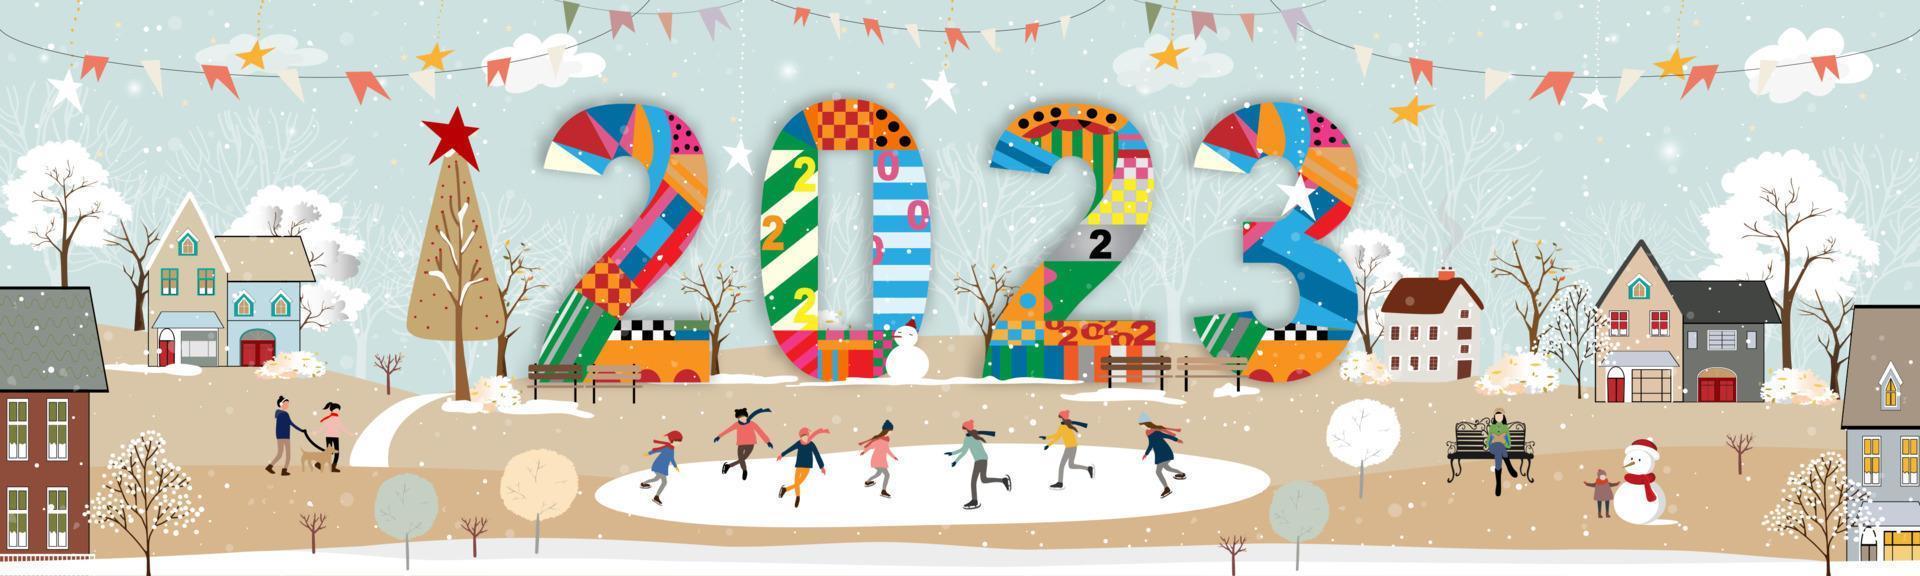 Happy New Year 2023 Card Winter Landscape In City With People Celebrating On Chritsmas Eve Winter Wonderland In The Town With Happy Kids Playing Ice Skating In The City Park Vector